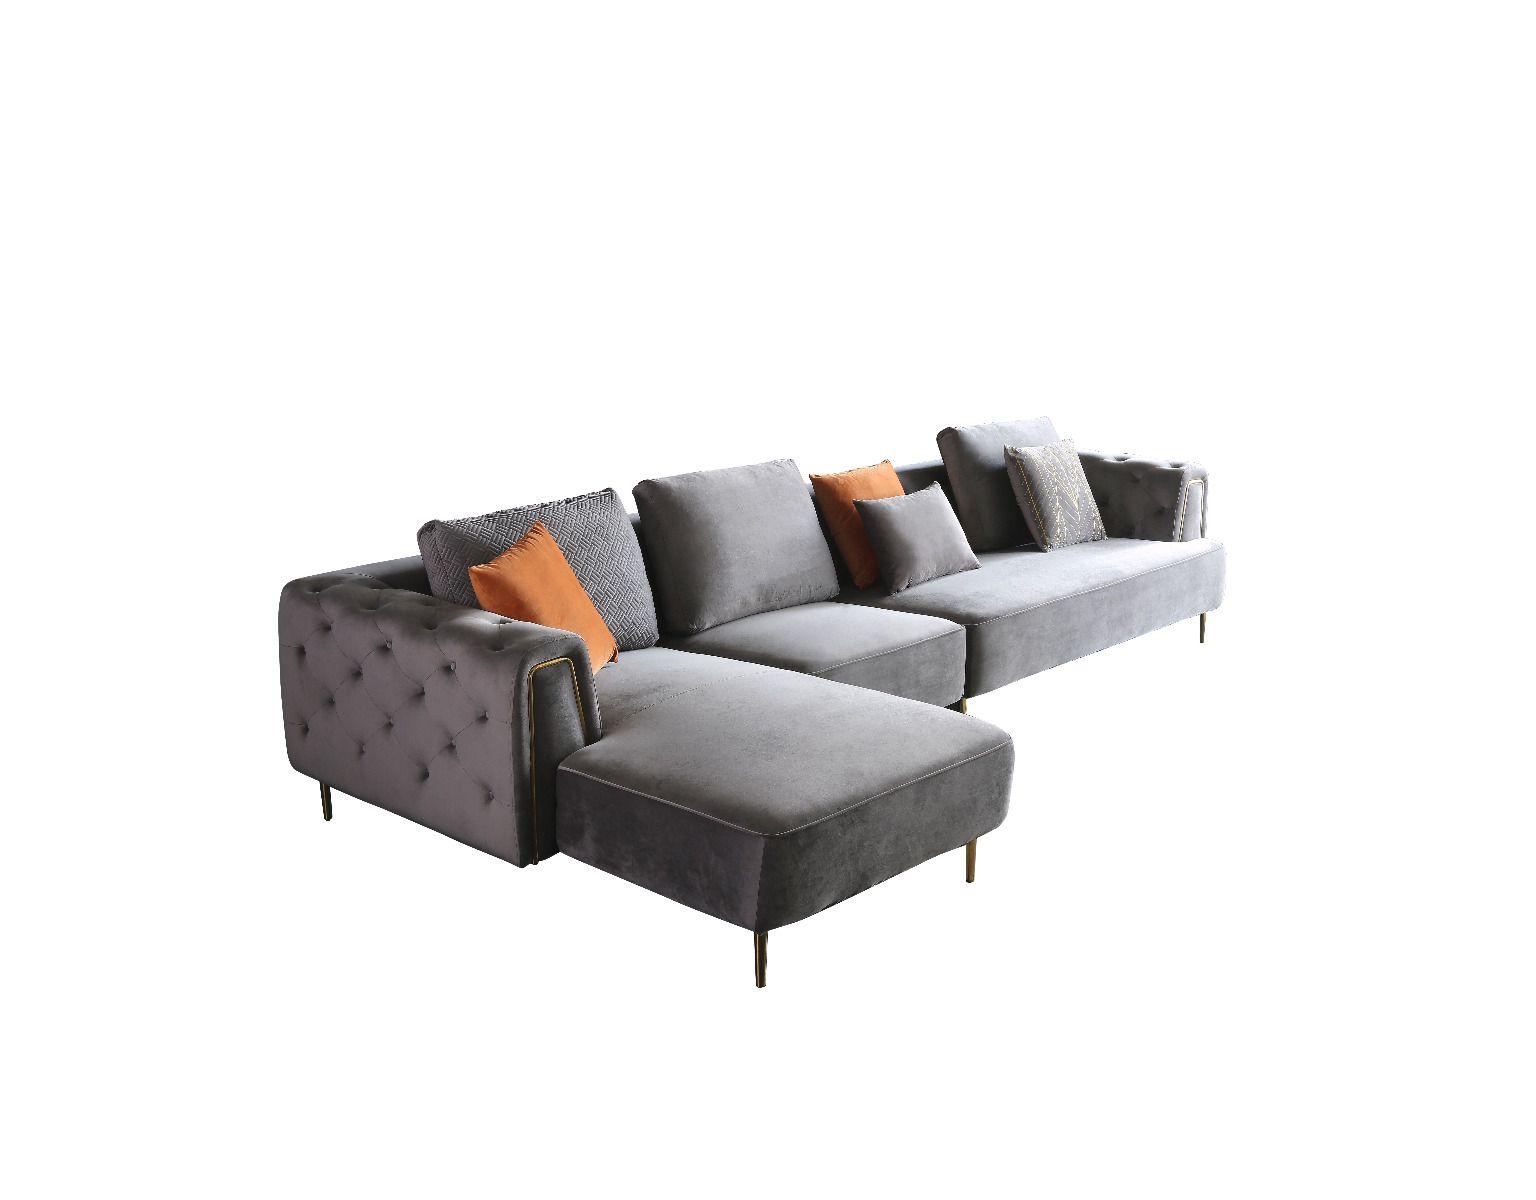 Contemporary Sectional Sofa AE-LD831R-GR AE-LD831R-GR in Gray Fabric